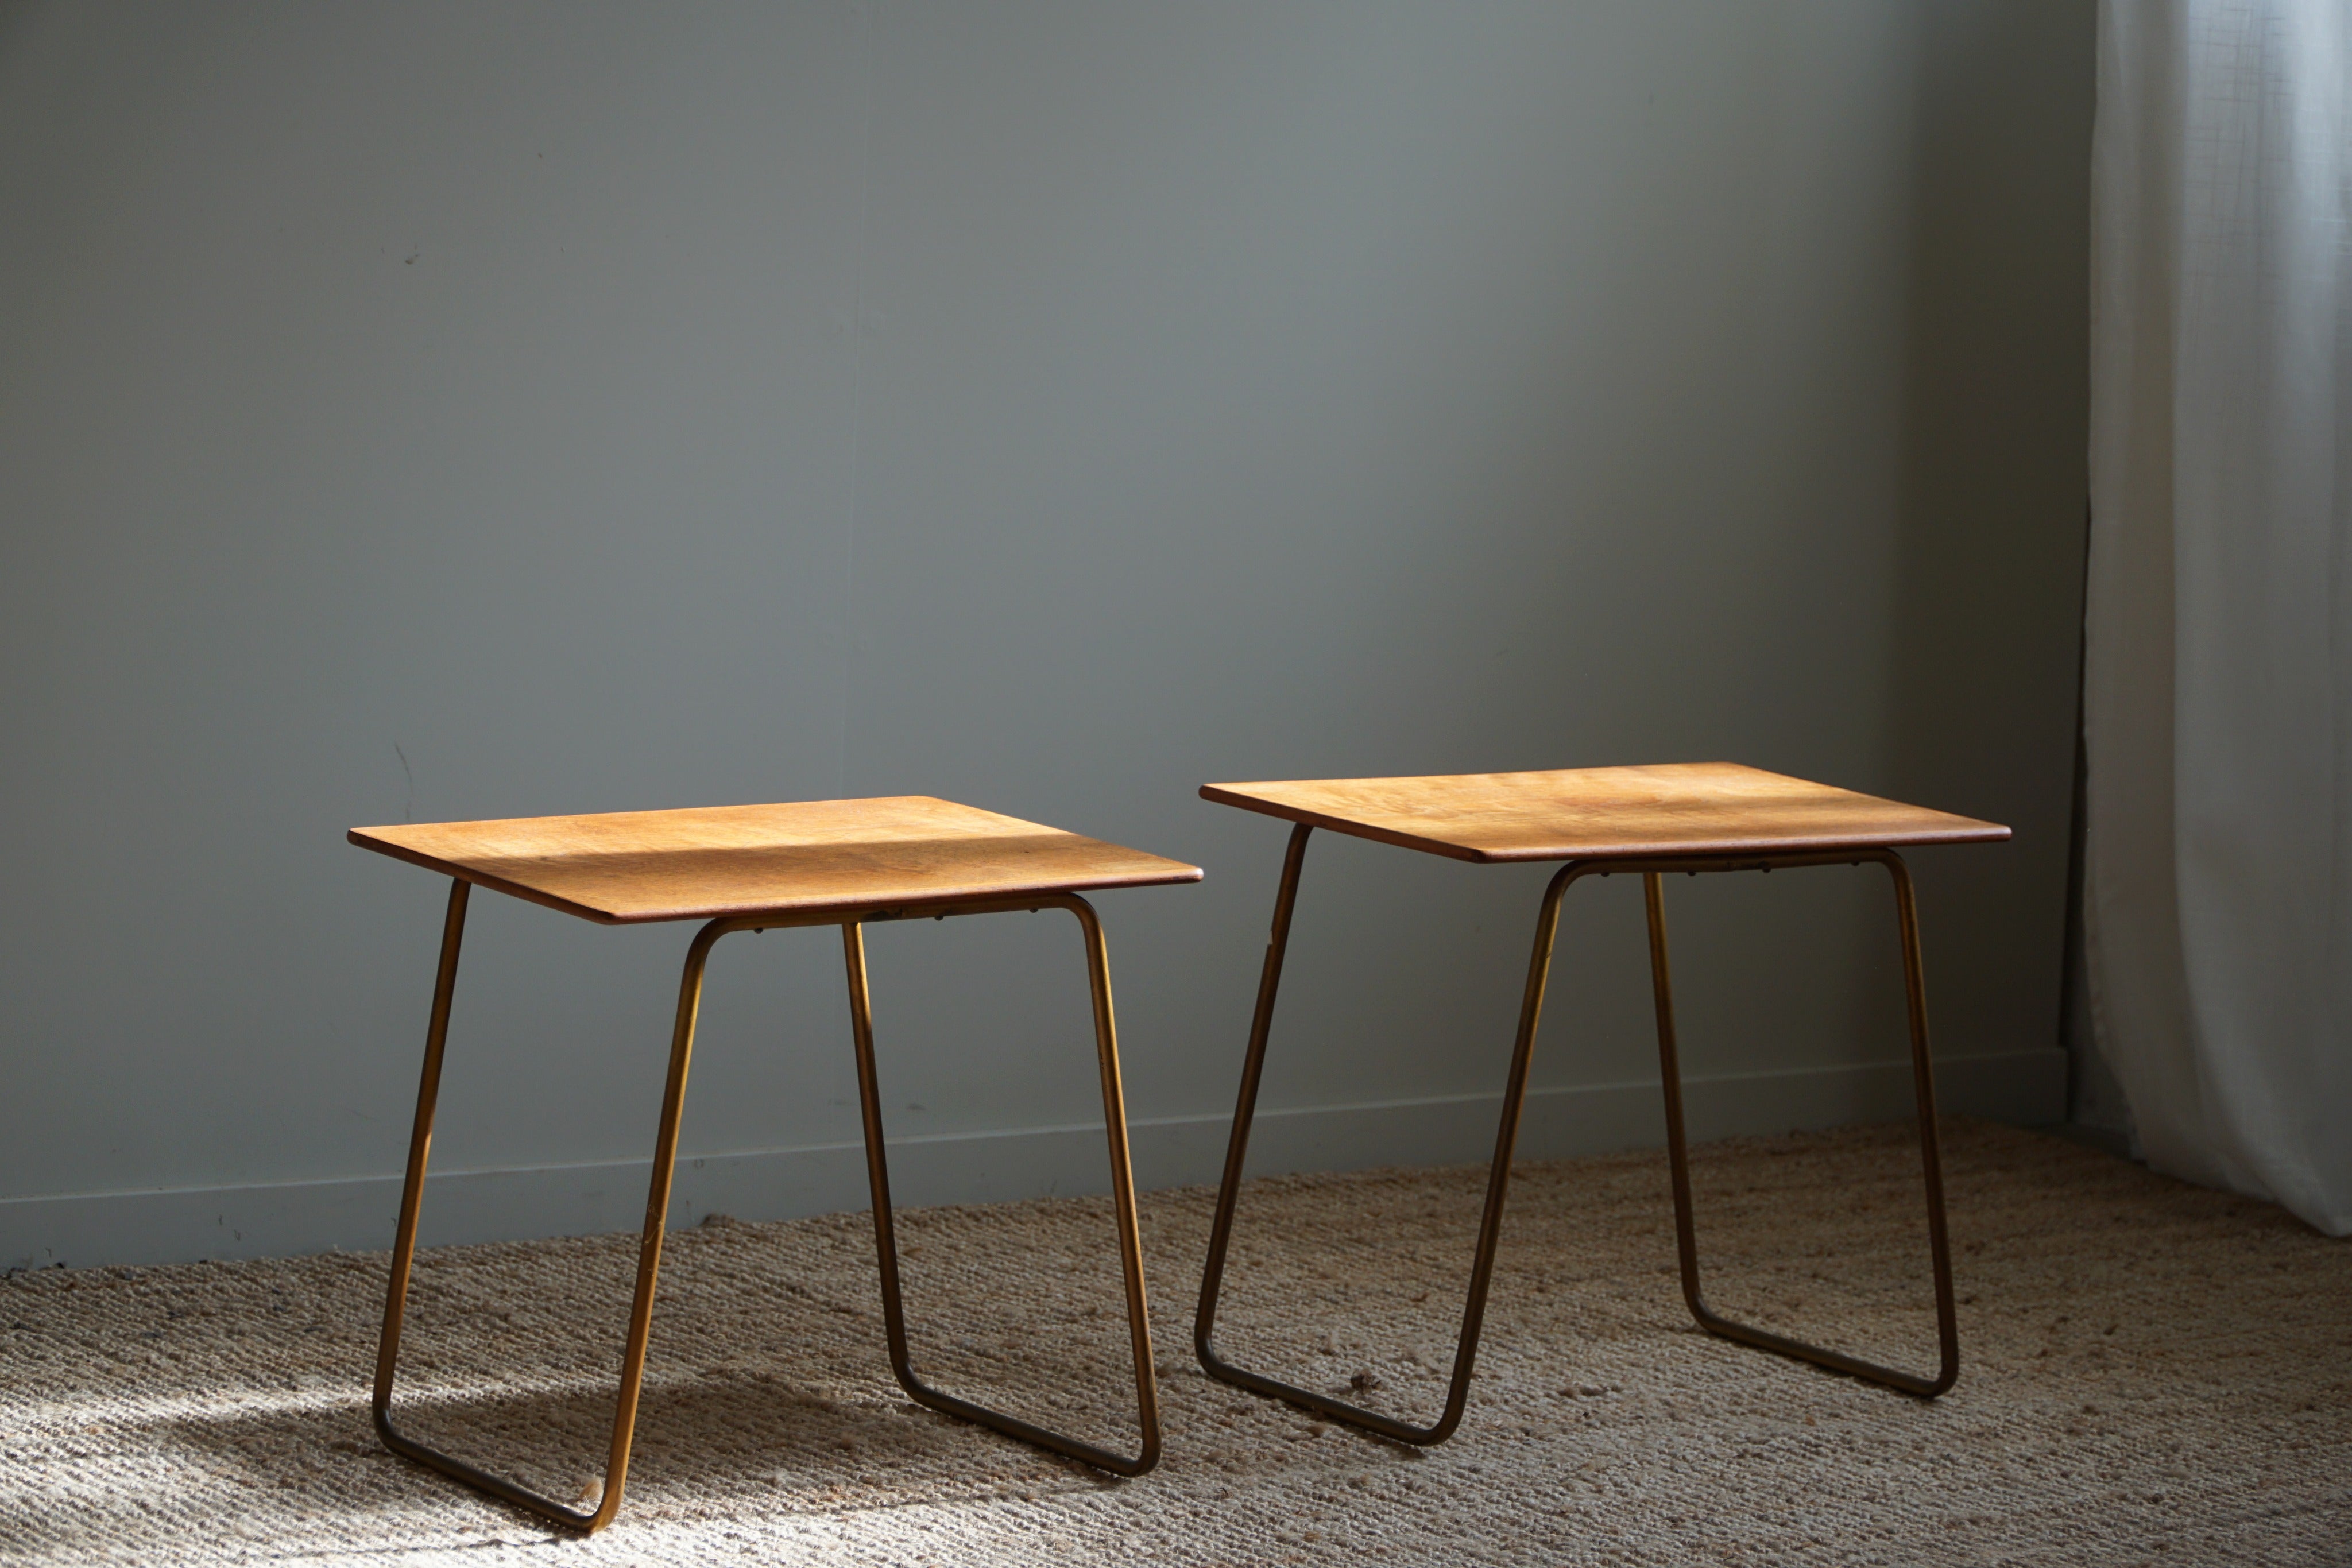 Pair of Side Tables in Teak and Steel, Danish Mid Century, 1960s For Sale 3